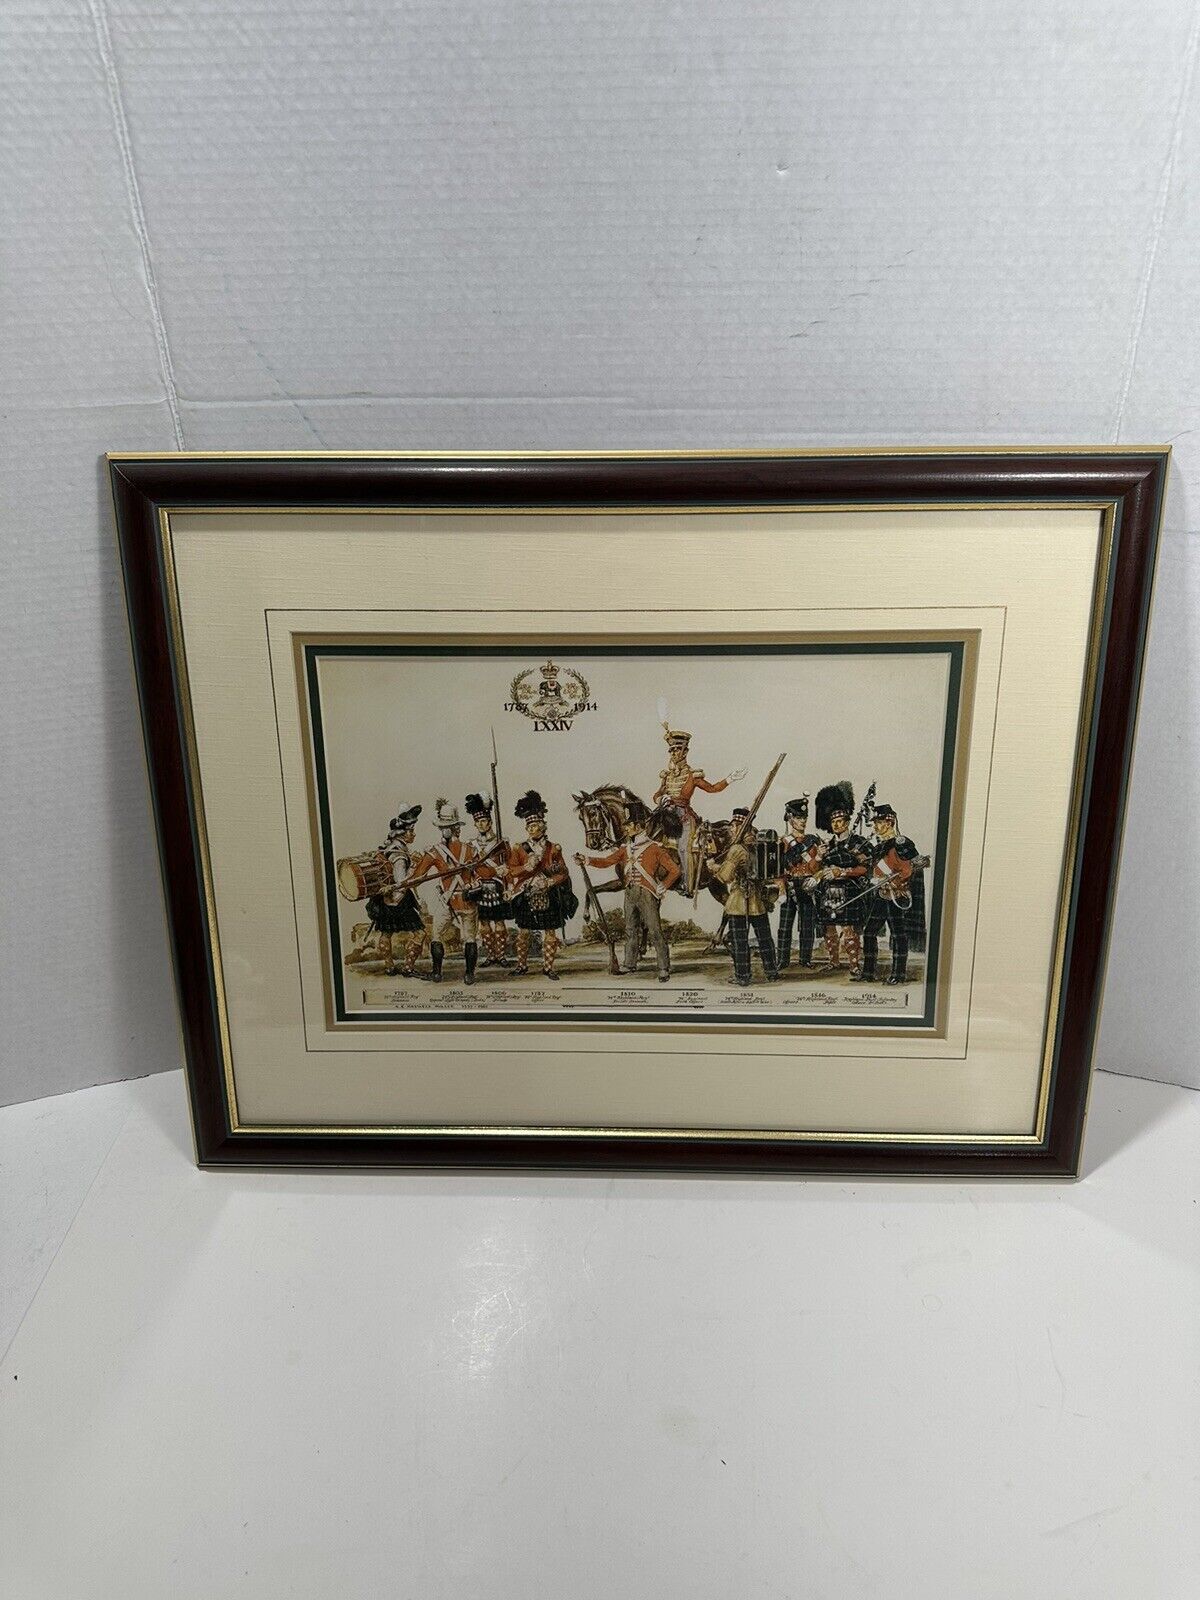 Uniforms of the 74th Highland Regiment by Haswell Miller Art Framed In Canada